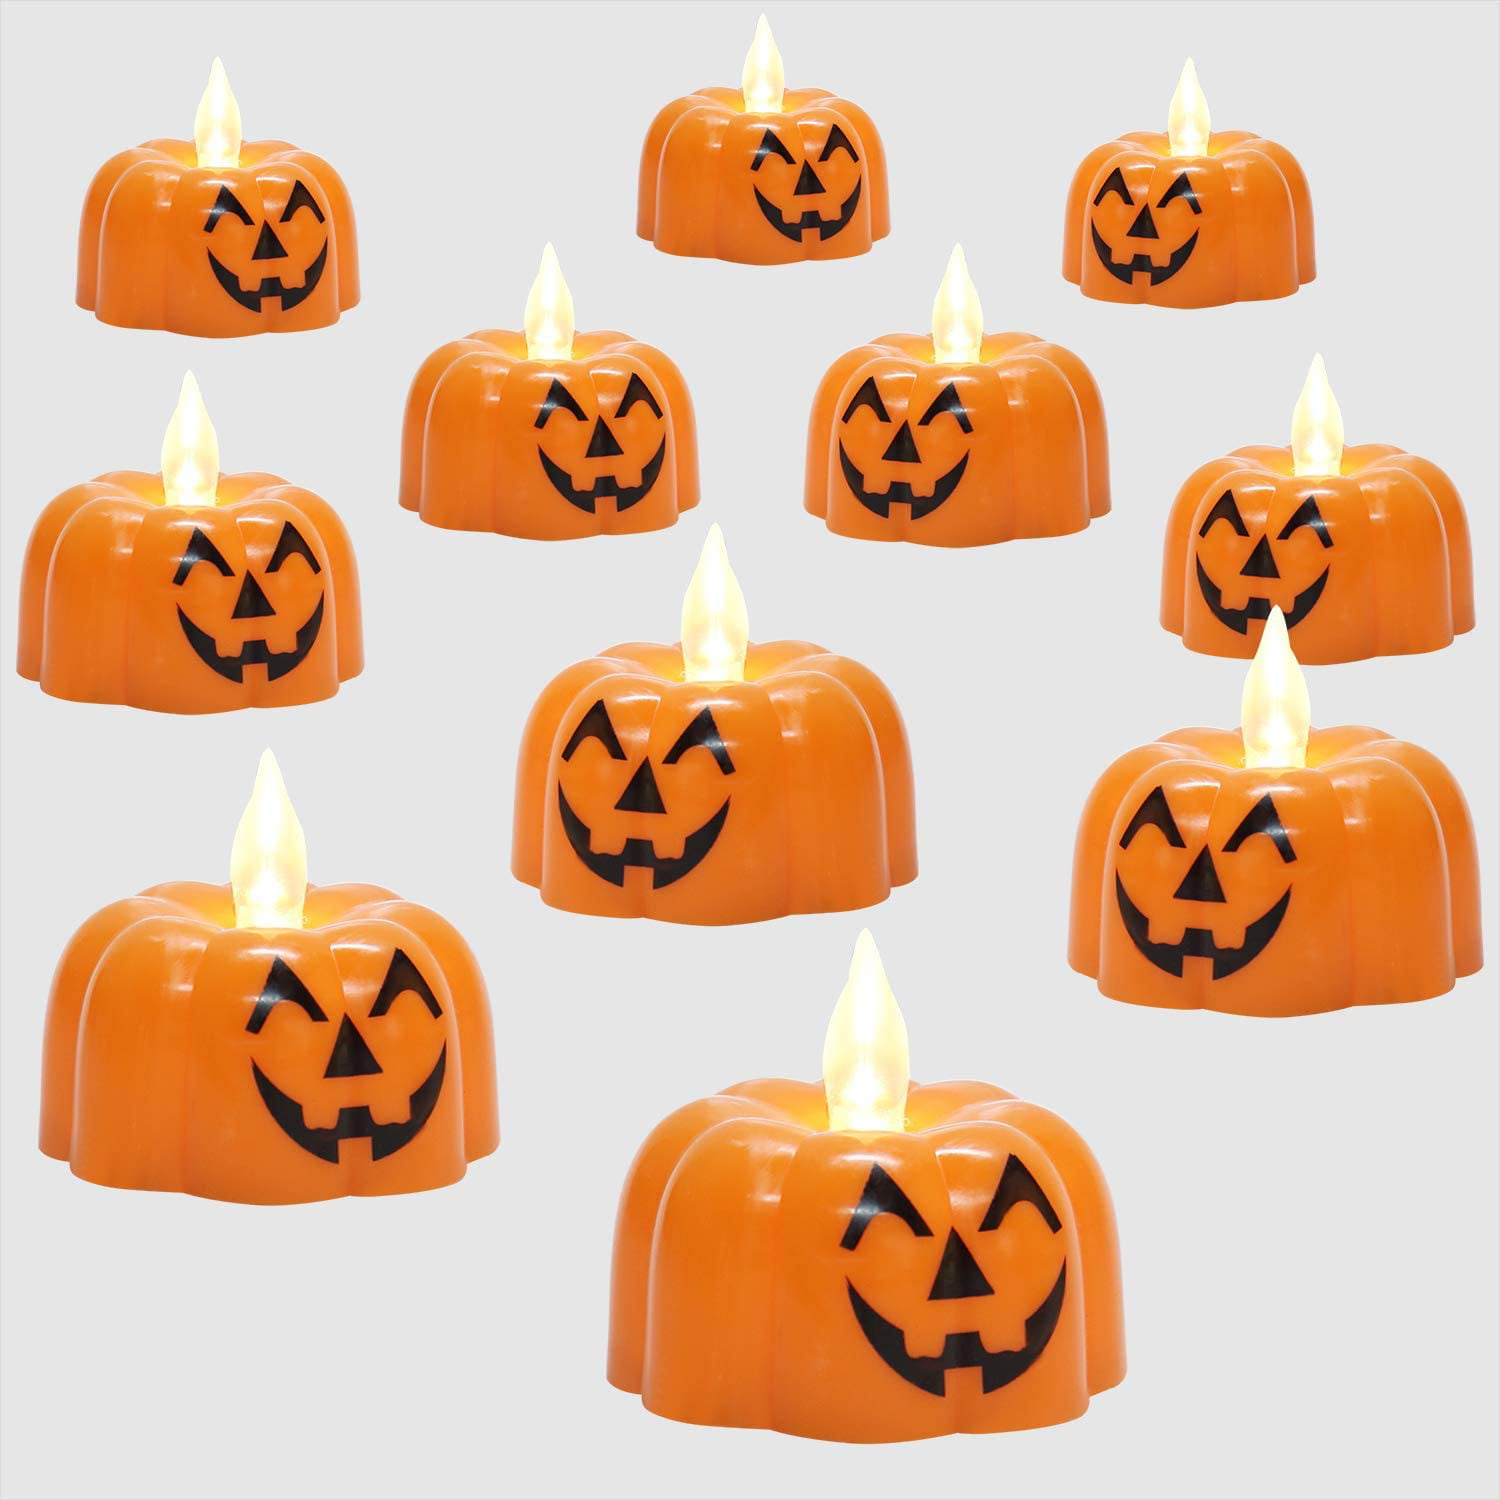 White Light for Halloween Decorations Indoor Outdoor Party Favors 12 Pieces Pumpkin Flameless Tea Light Candles Halloween Pumpkin LED Tealight Pumpkin Face Mini Plastic Candle Battery Operated